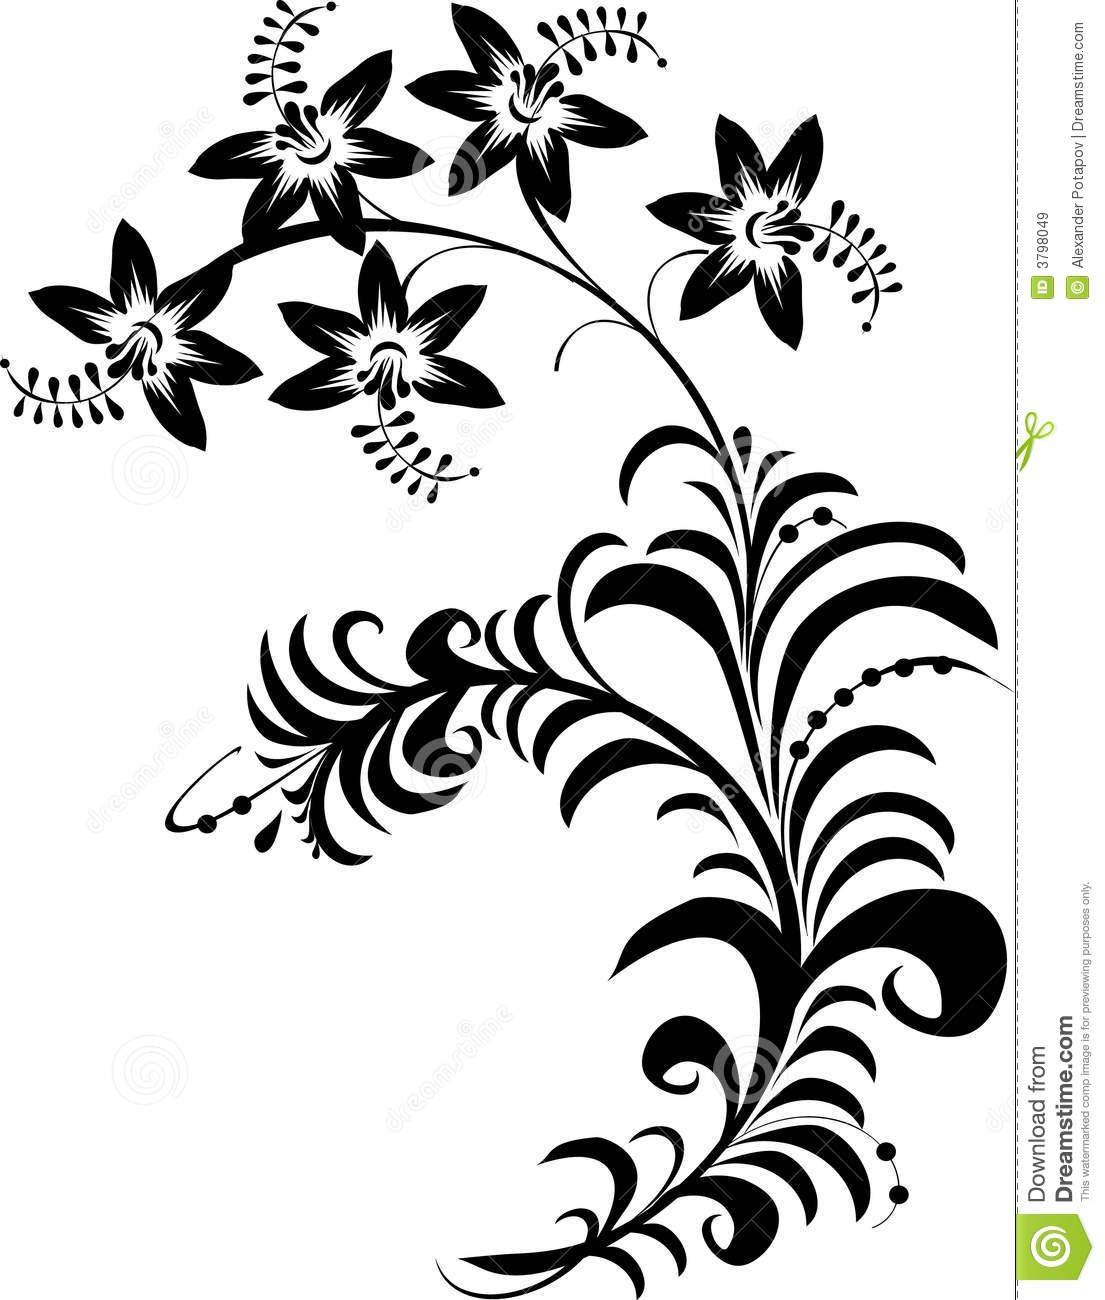 Black and White Flower Drawings